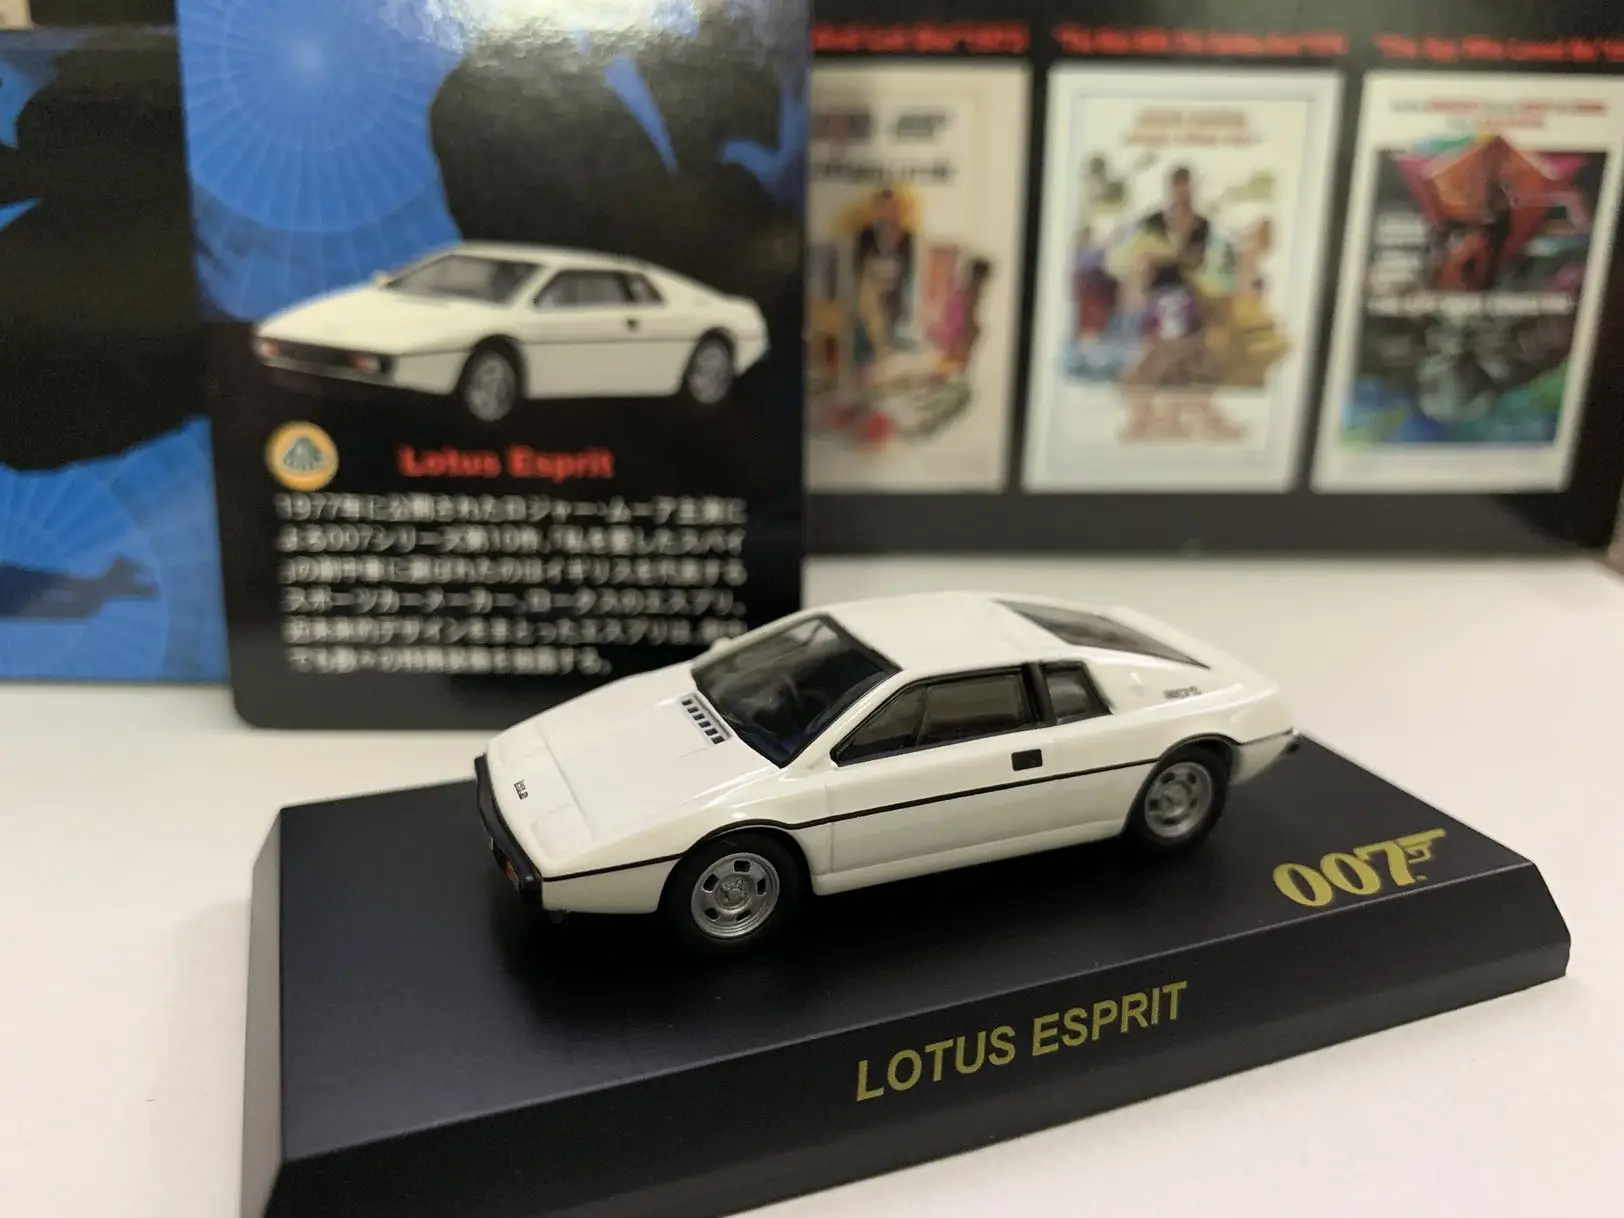 

1/72 KYOSHO Lotus Esprit 007 Movie Underwater City Collection of die-cast alloy assembled car decoration model toys